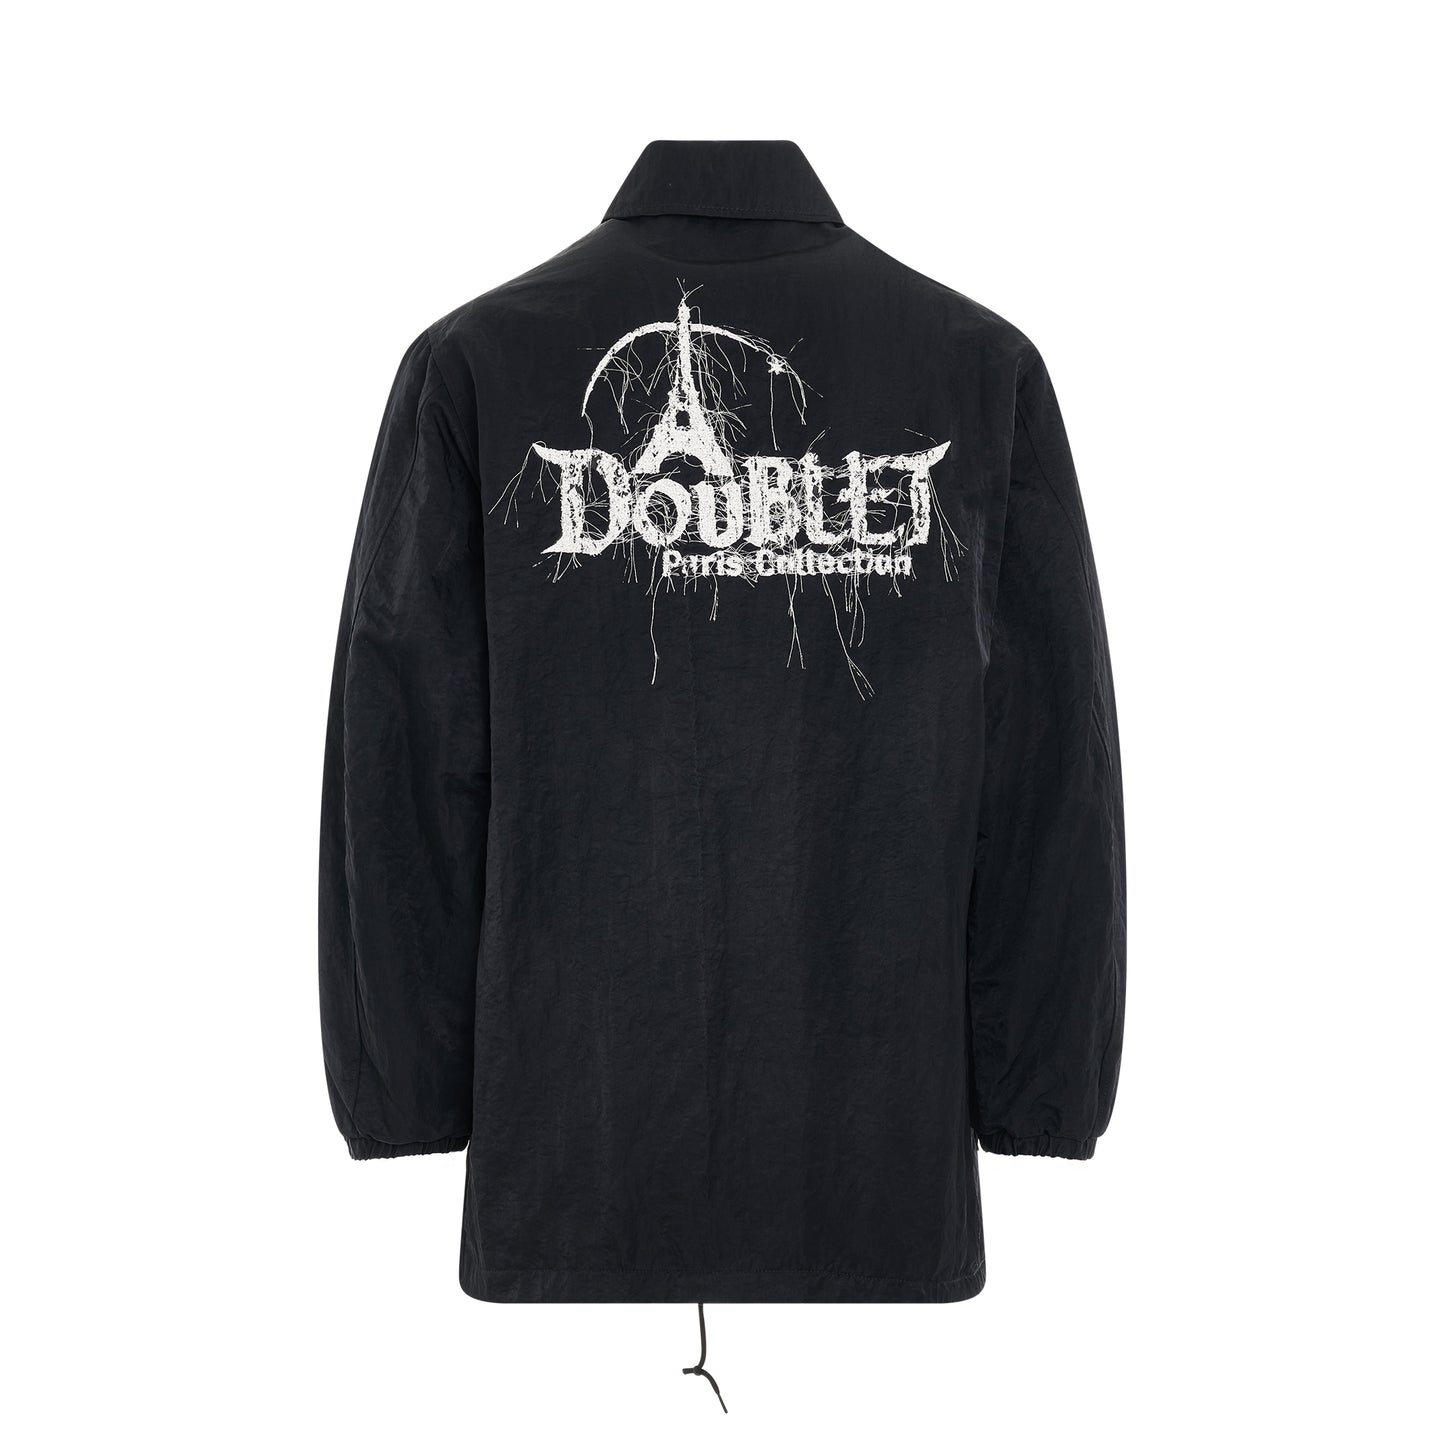 "DOUBLAND" Embroidery Coach Jacket in Black